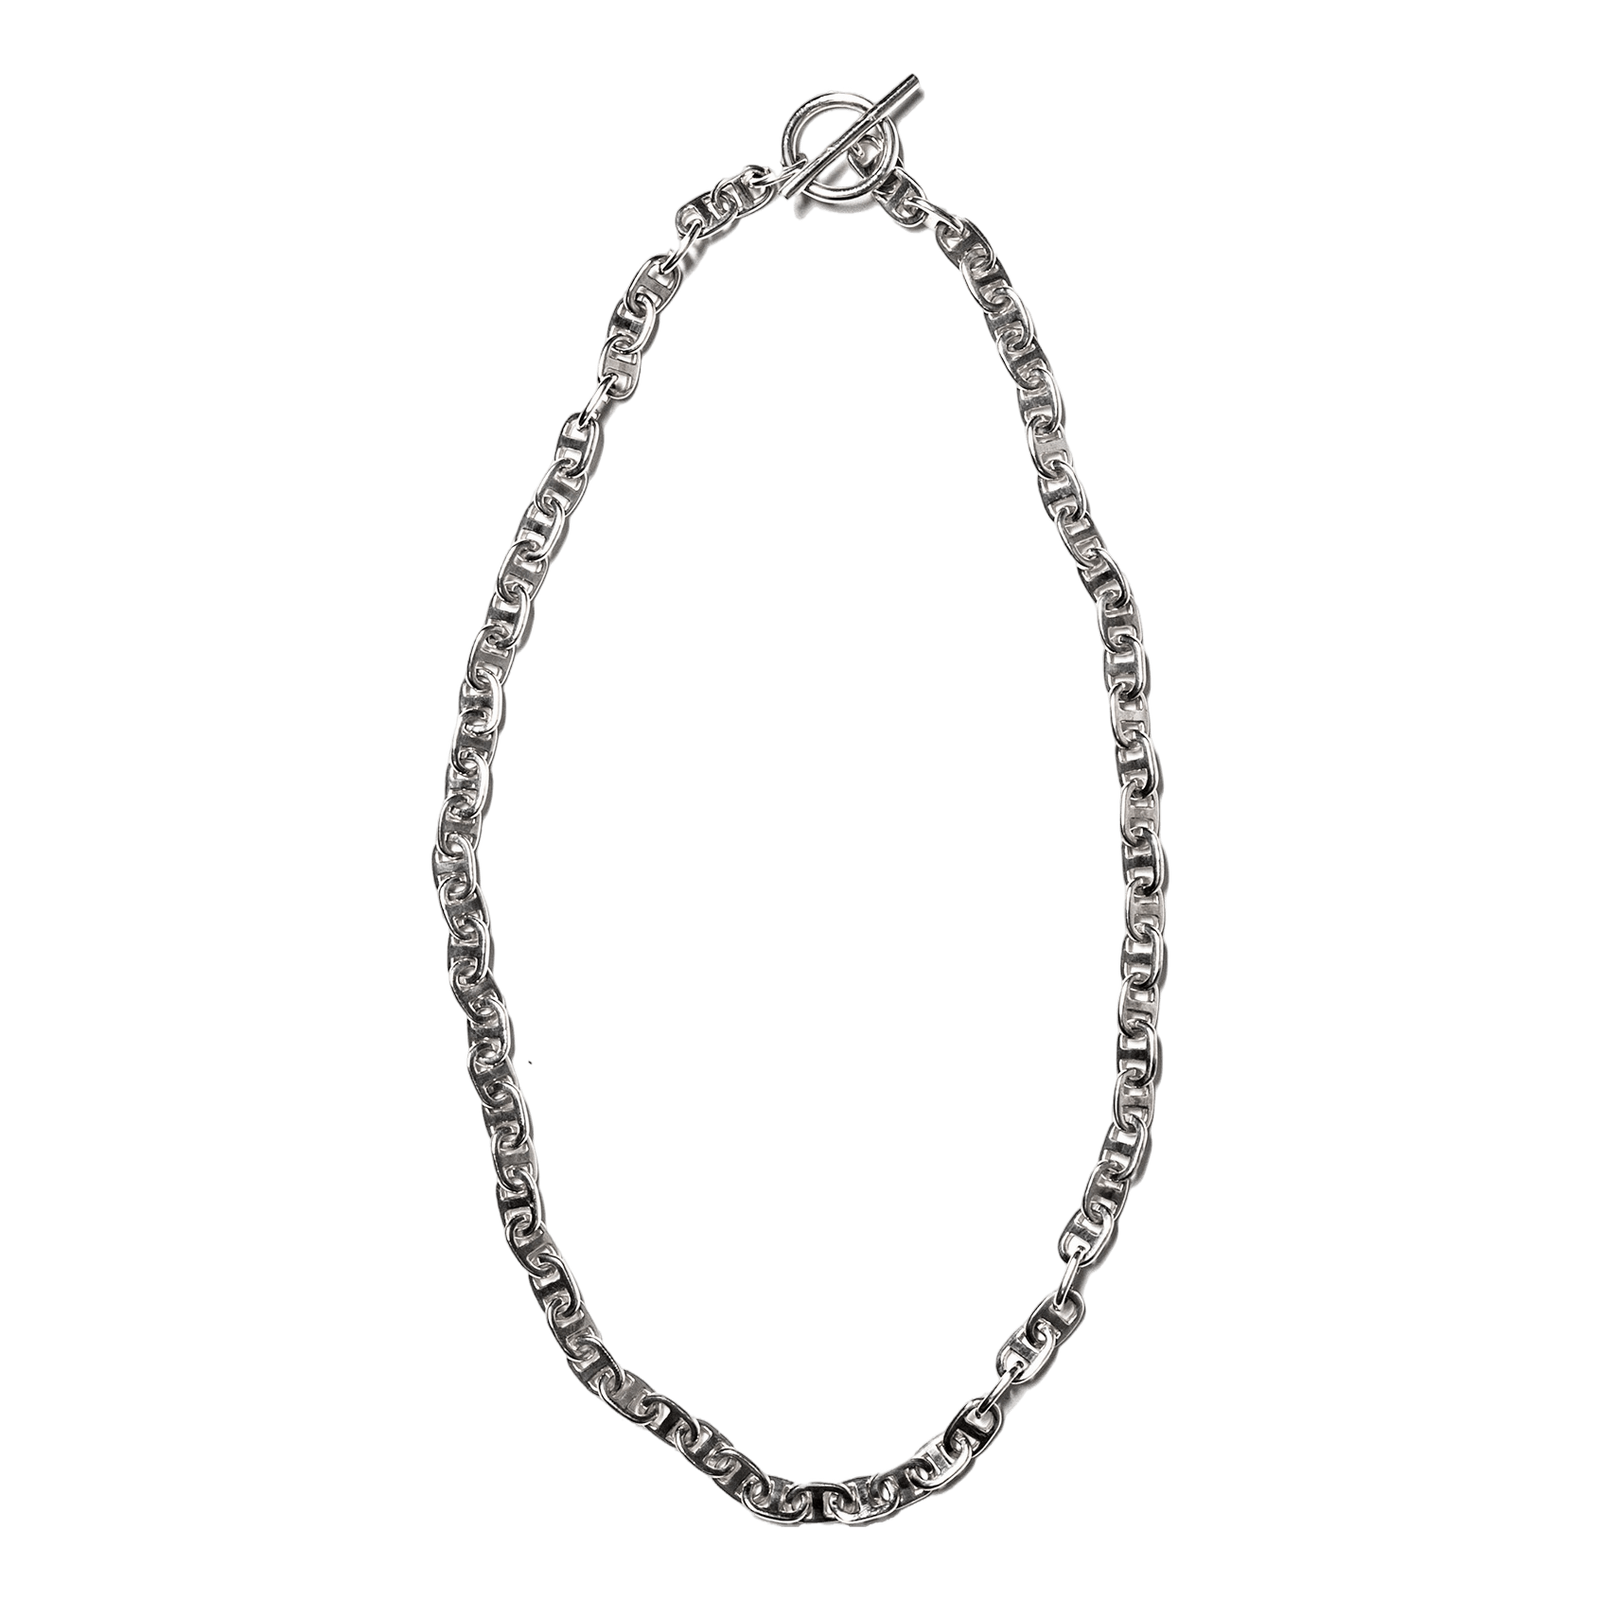 Chain Link Necklace 7mm Silver 925